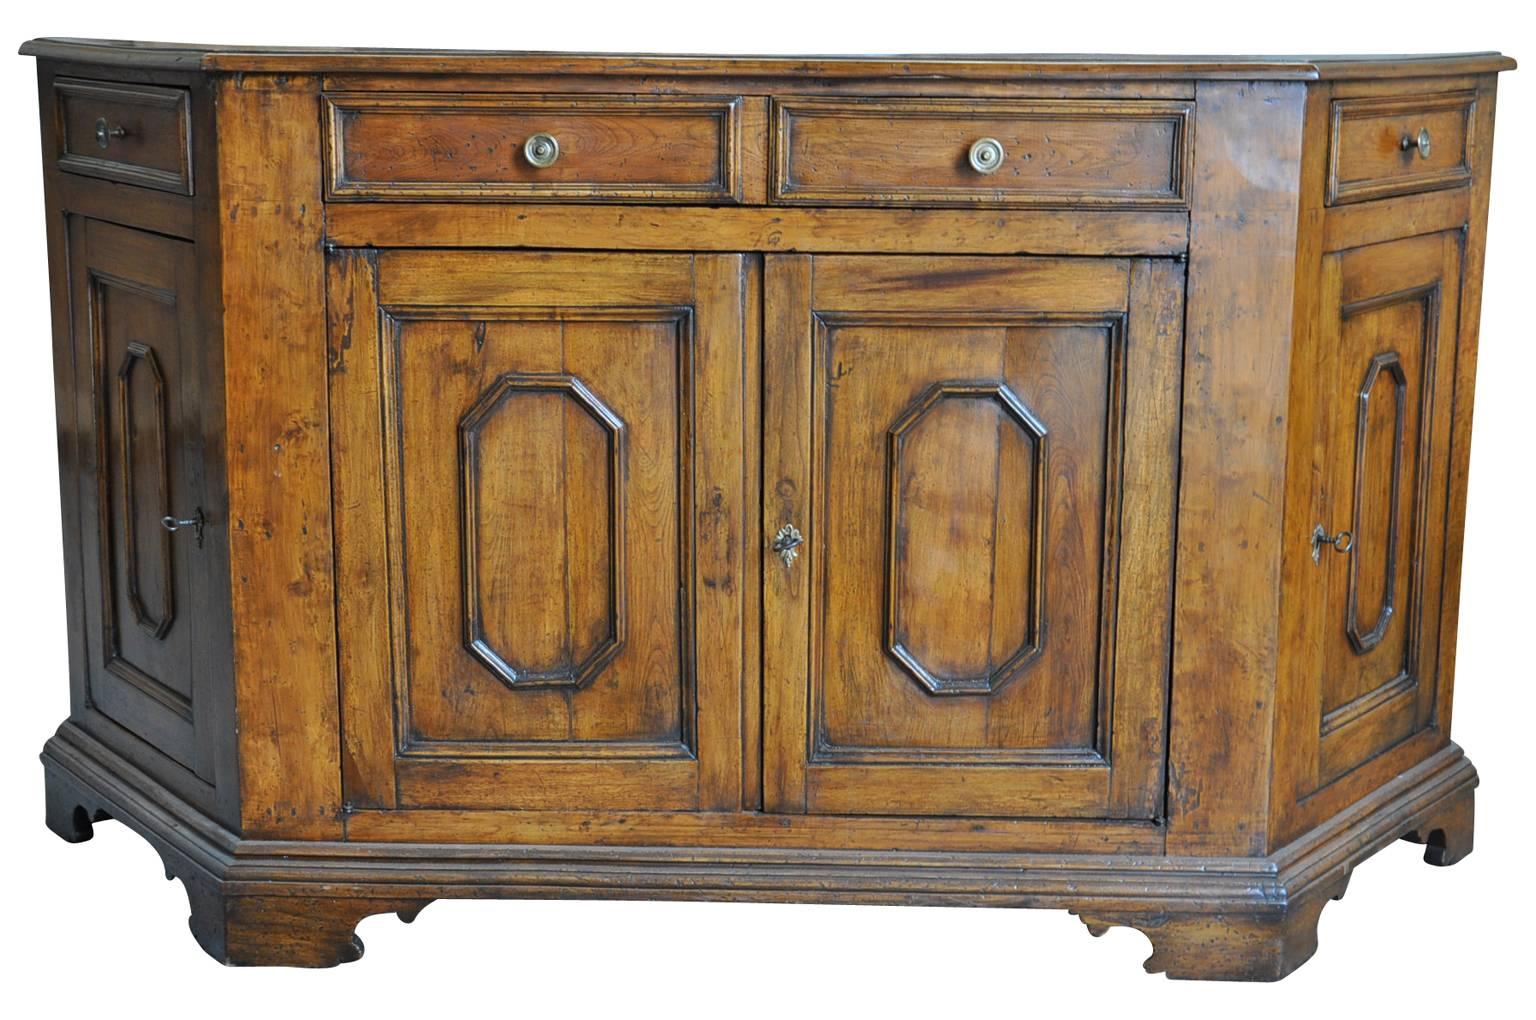 A very handsome mid-19th century credenza from Northern Italy. Wonderfully constructed from walnut with four doors and four drawers raised on bracket feet. The patina is very rich and luminous.